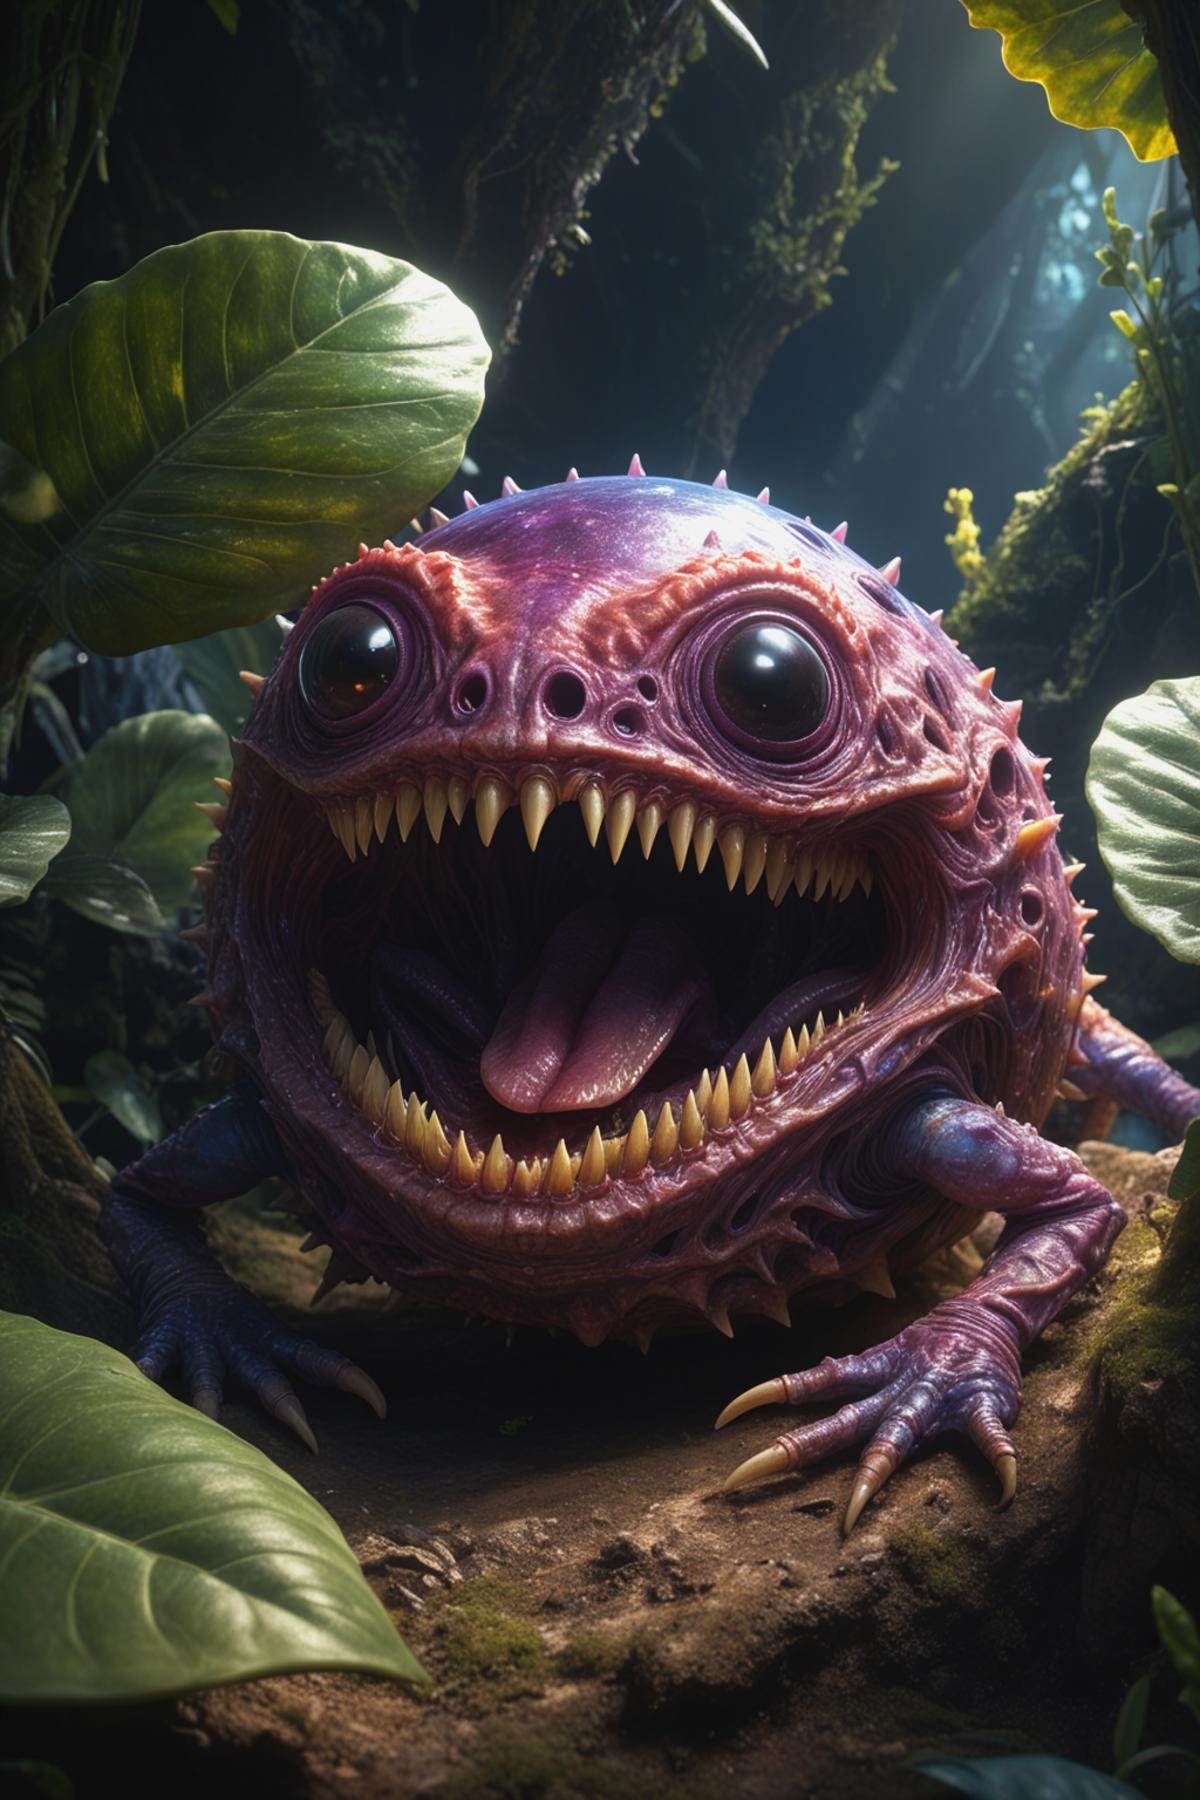 A purple creature with big teeth and sharp claws in a jungle environment.